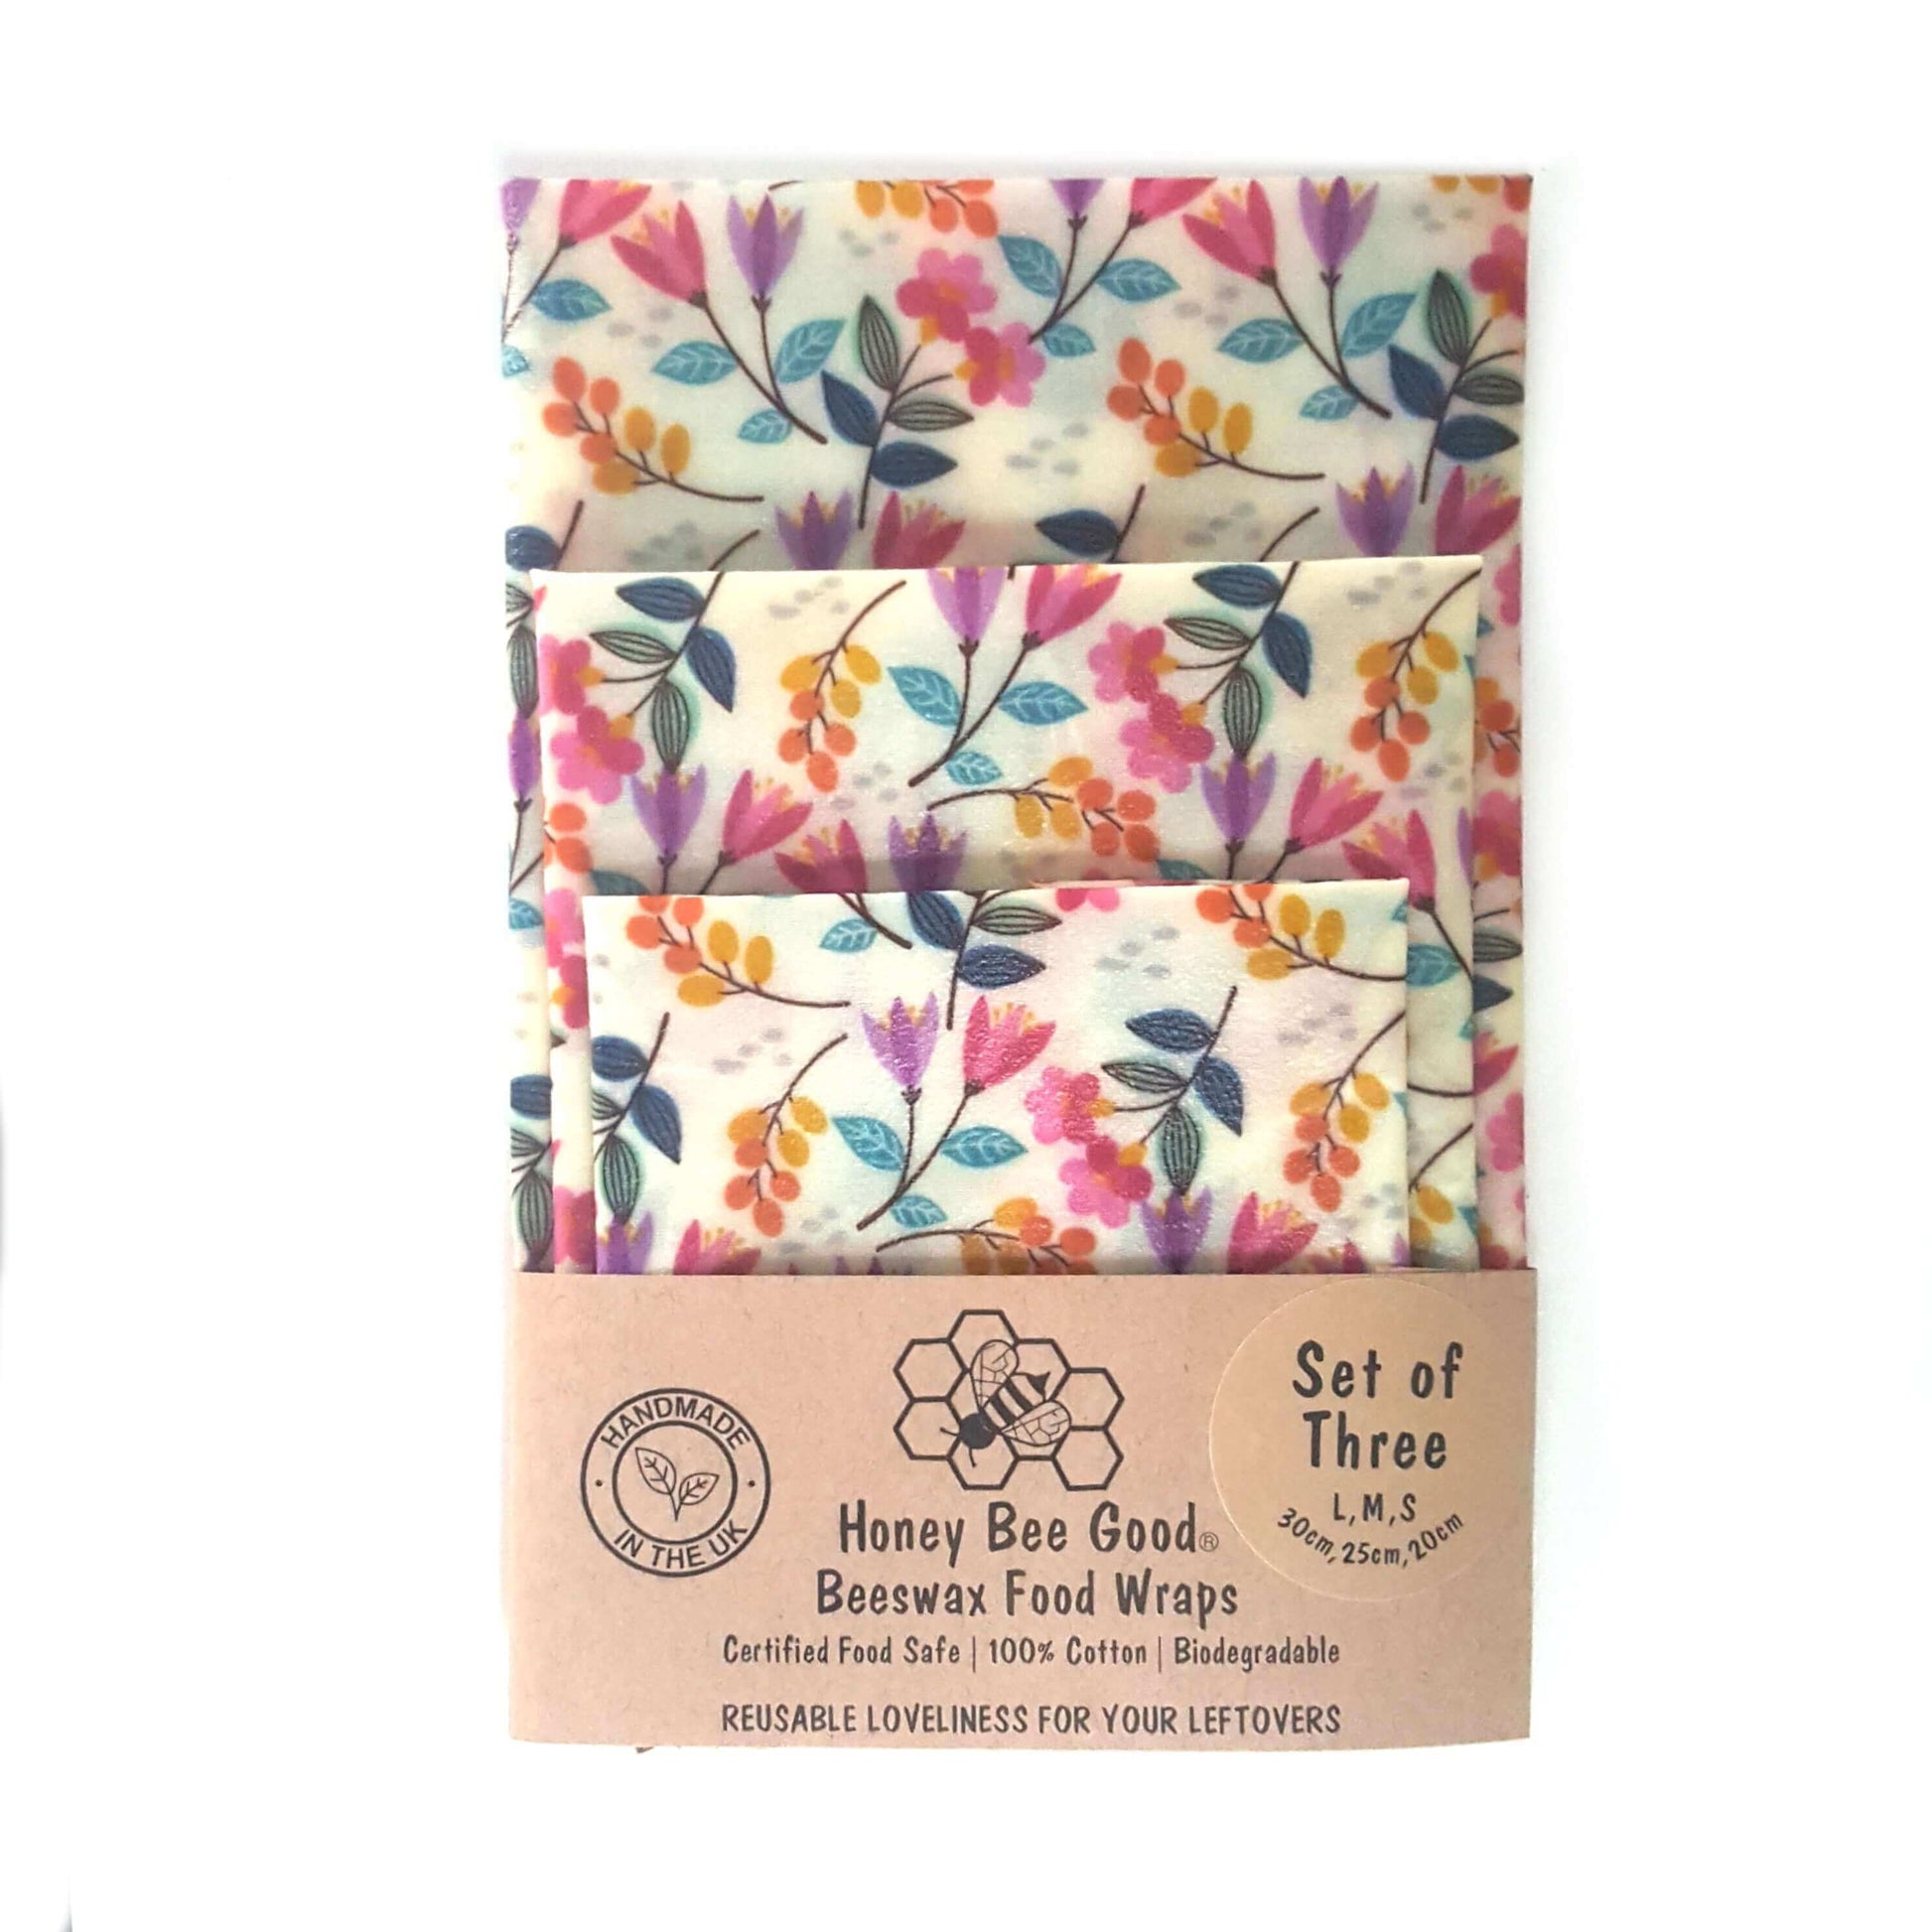 Reusable Beeswax Food Wraps 100% Hand Made in the UK by Honey Bee Good shown in Classic Set of 3 Meadow